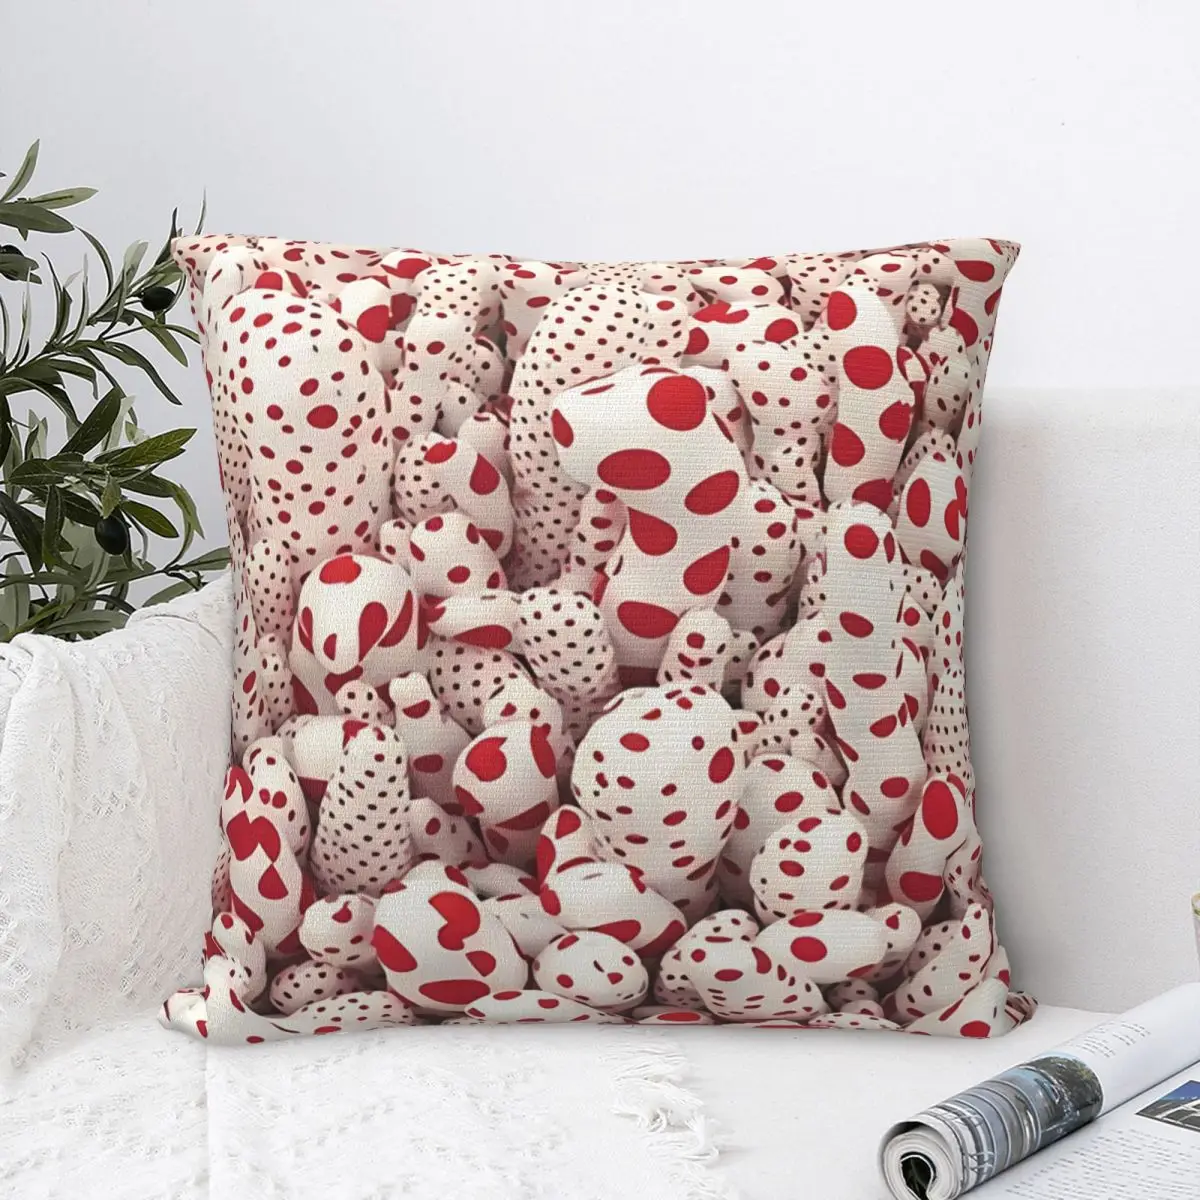 

Scary Polkadots Throw Pillow Case Yayoi Kusama Japanese Artist Backpack Cojines Covers DIY Printed Soft Chair Decor